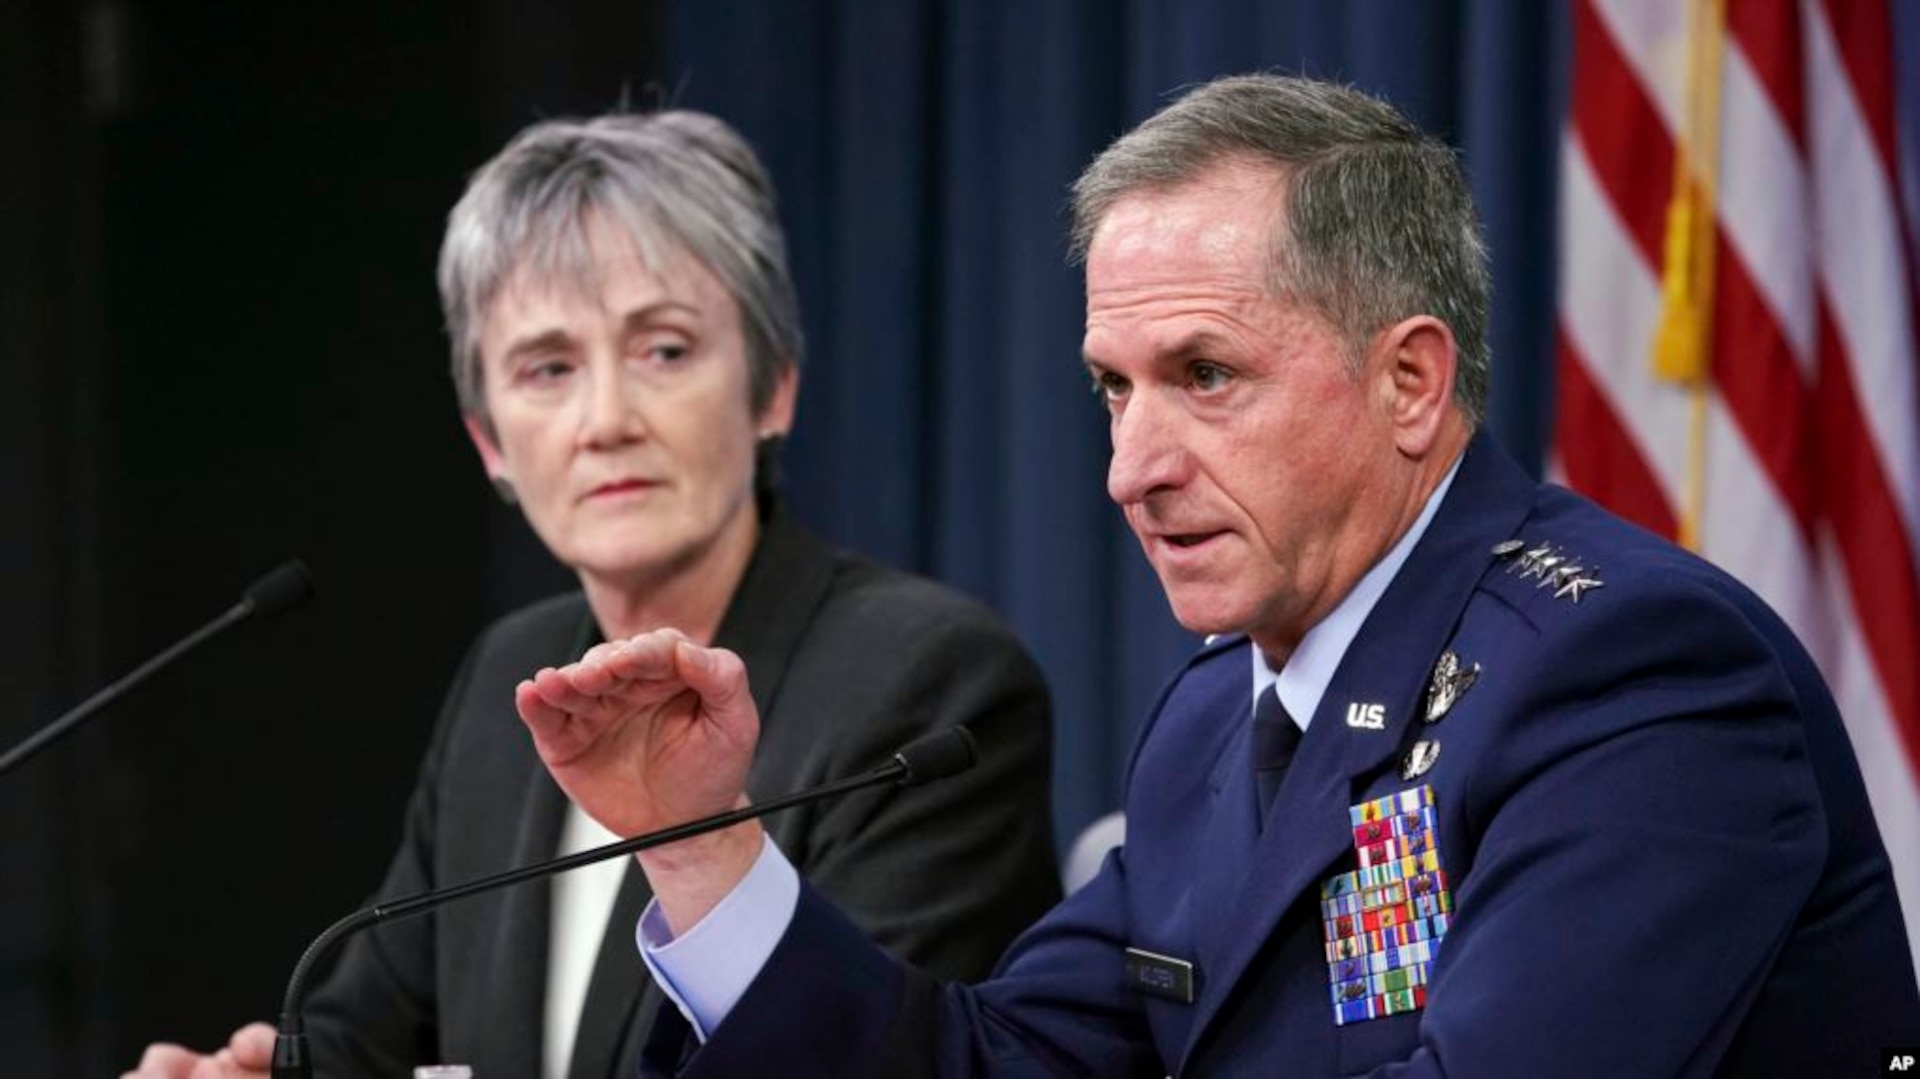 Secretary of the Air Force Heather Wilson and Air Force Chief of Staff Gen. David L. Goldfein shared in a memorandum to wing, numbered Air Force and major command commanders May 31, on a draft plan for new Line of the Air Force officer promotion categories.